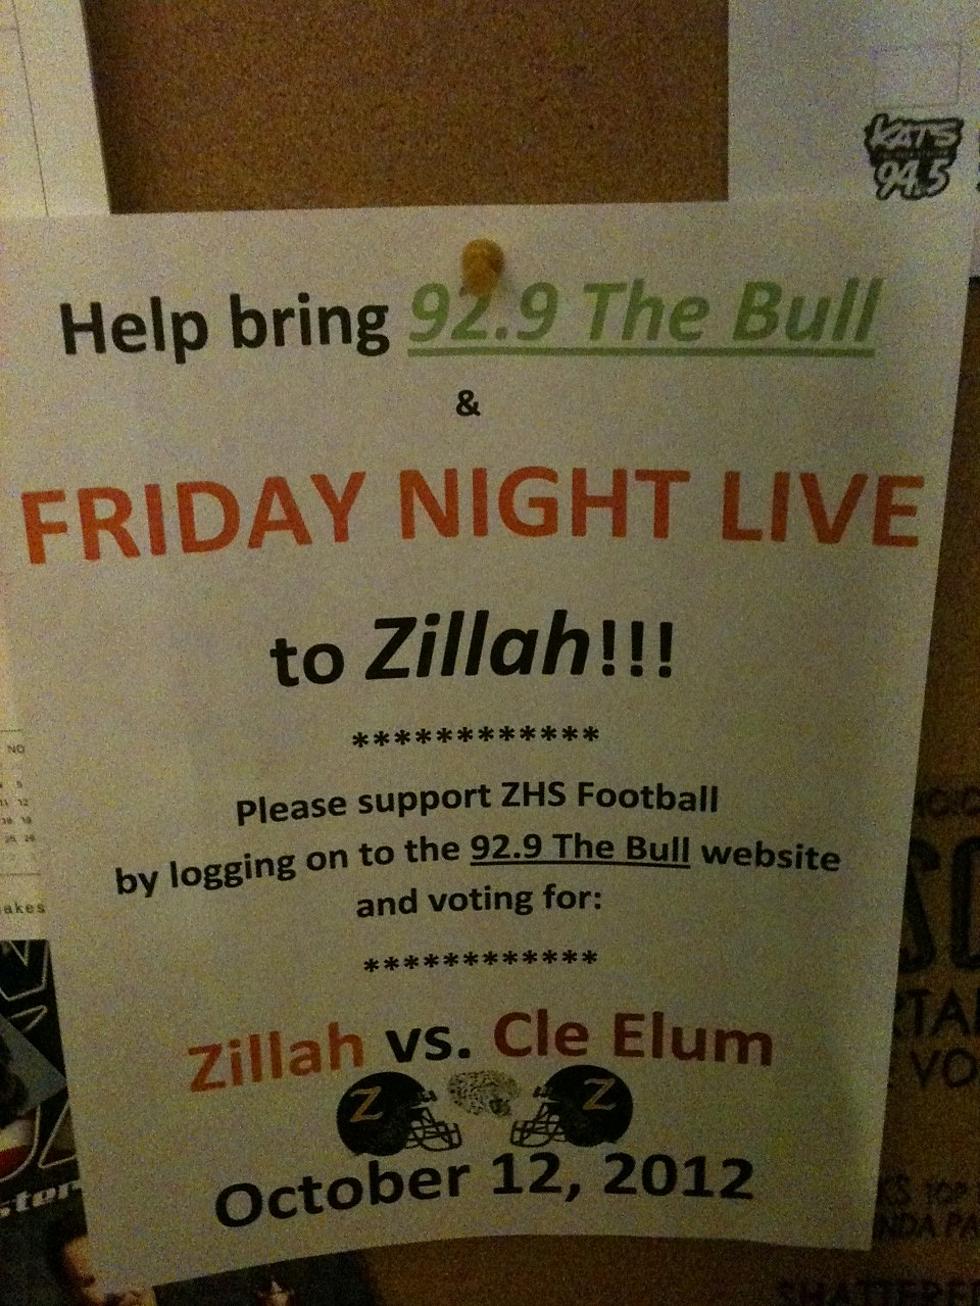 This Might Just Be the Reason Zillah Won Friday Night Live … Schools Take Note!